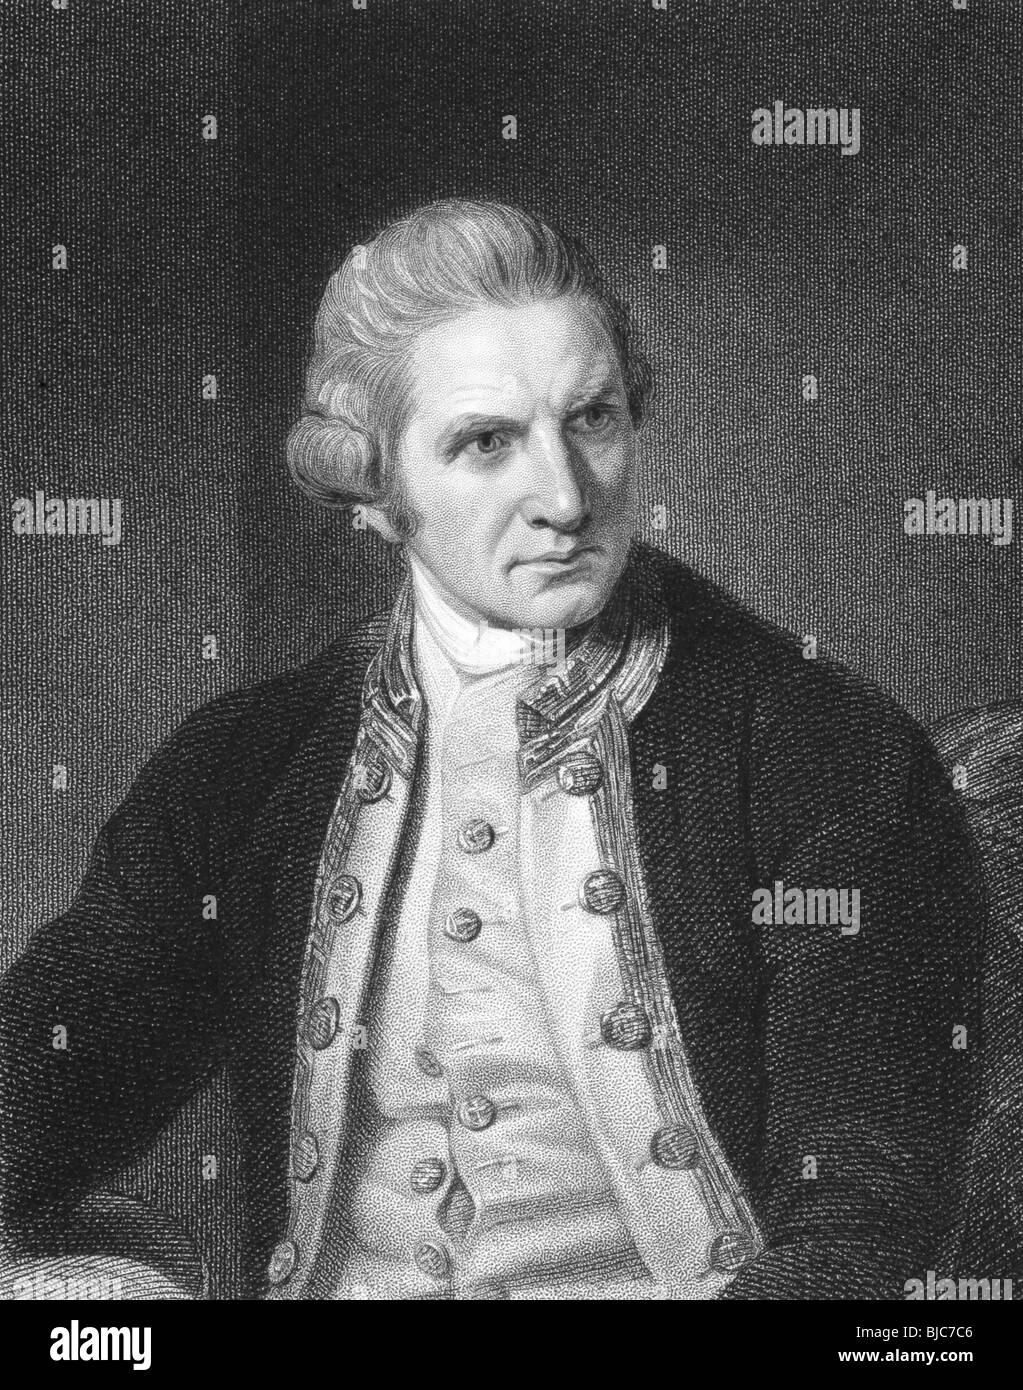 Captain Cook (1728-1779) on engraving from the 1800s.English explorer, navigator and cartographer. Stock Photo